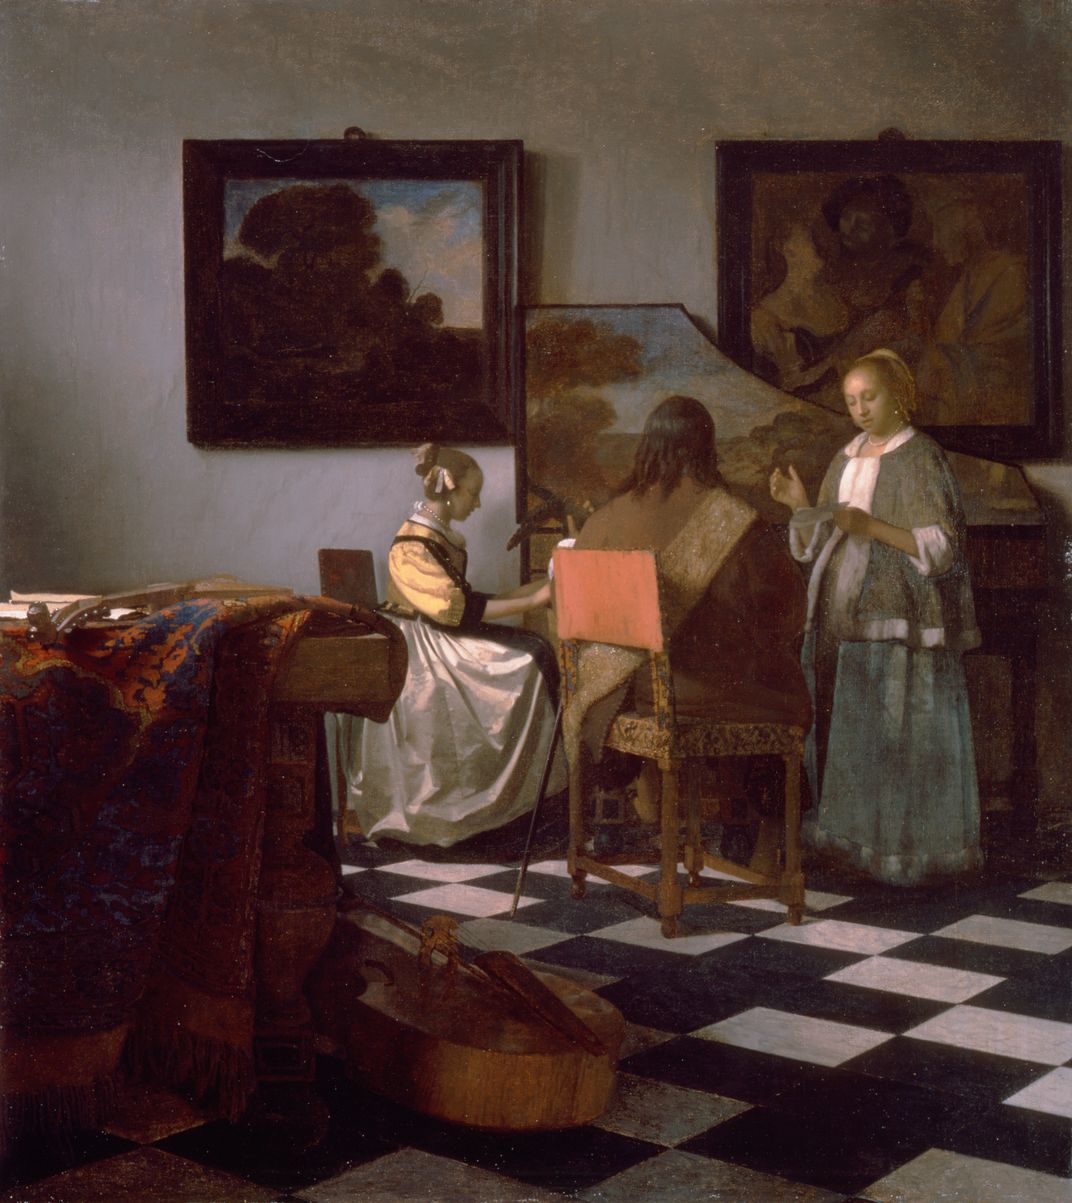 A young girl sits at a piano and practices in a stately room with black and white checked floor and canvases on the walls